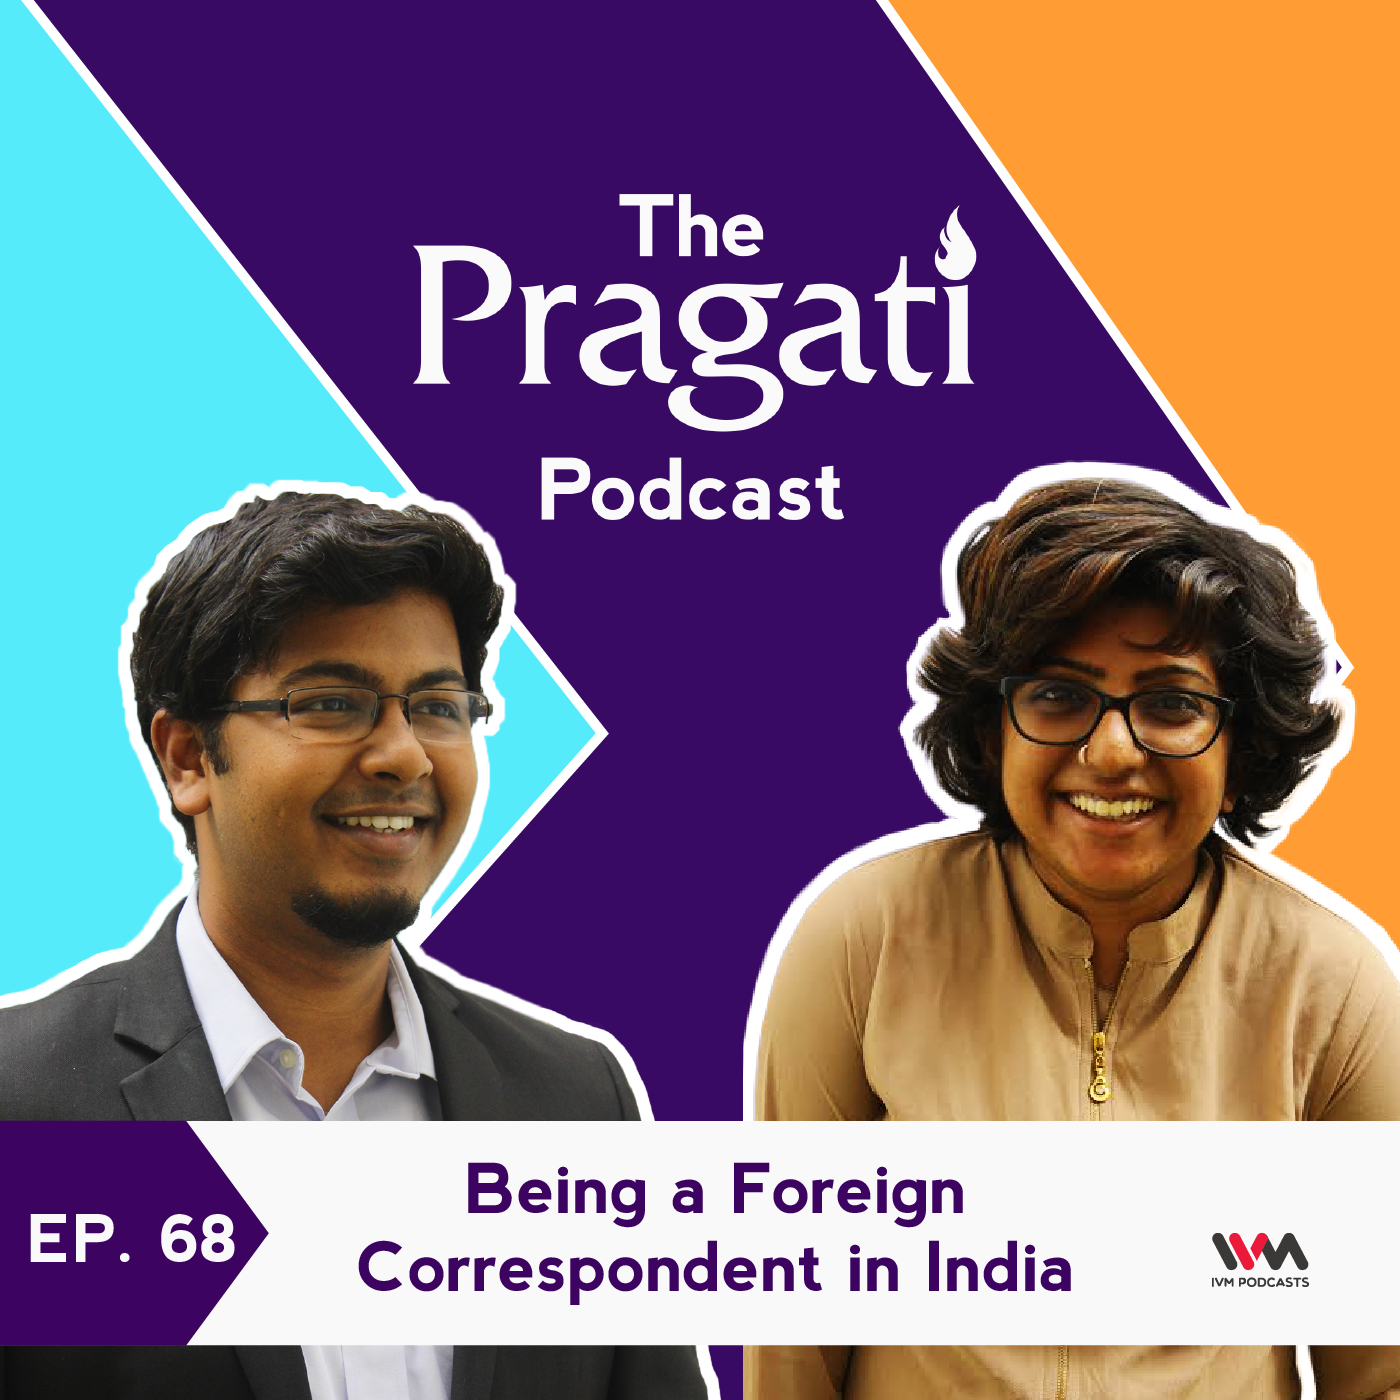 Ep. 68: Being a Foreign Correspondent in India